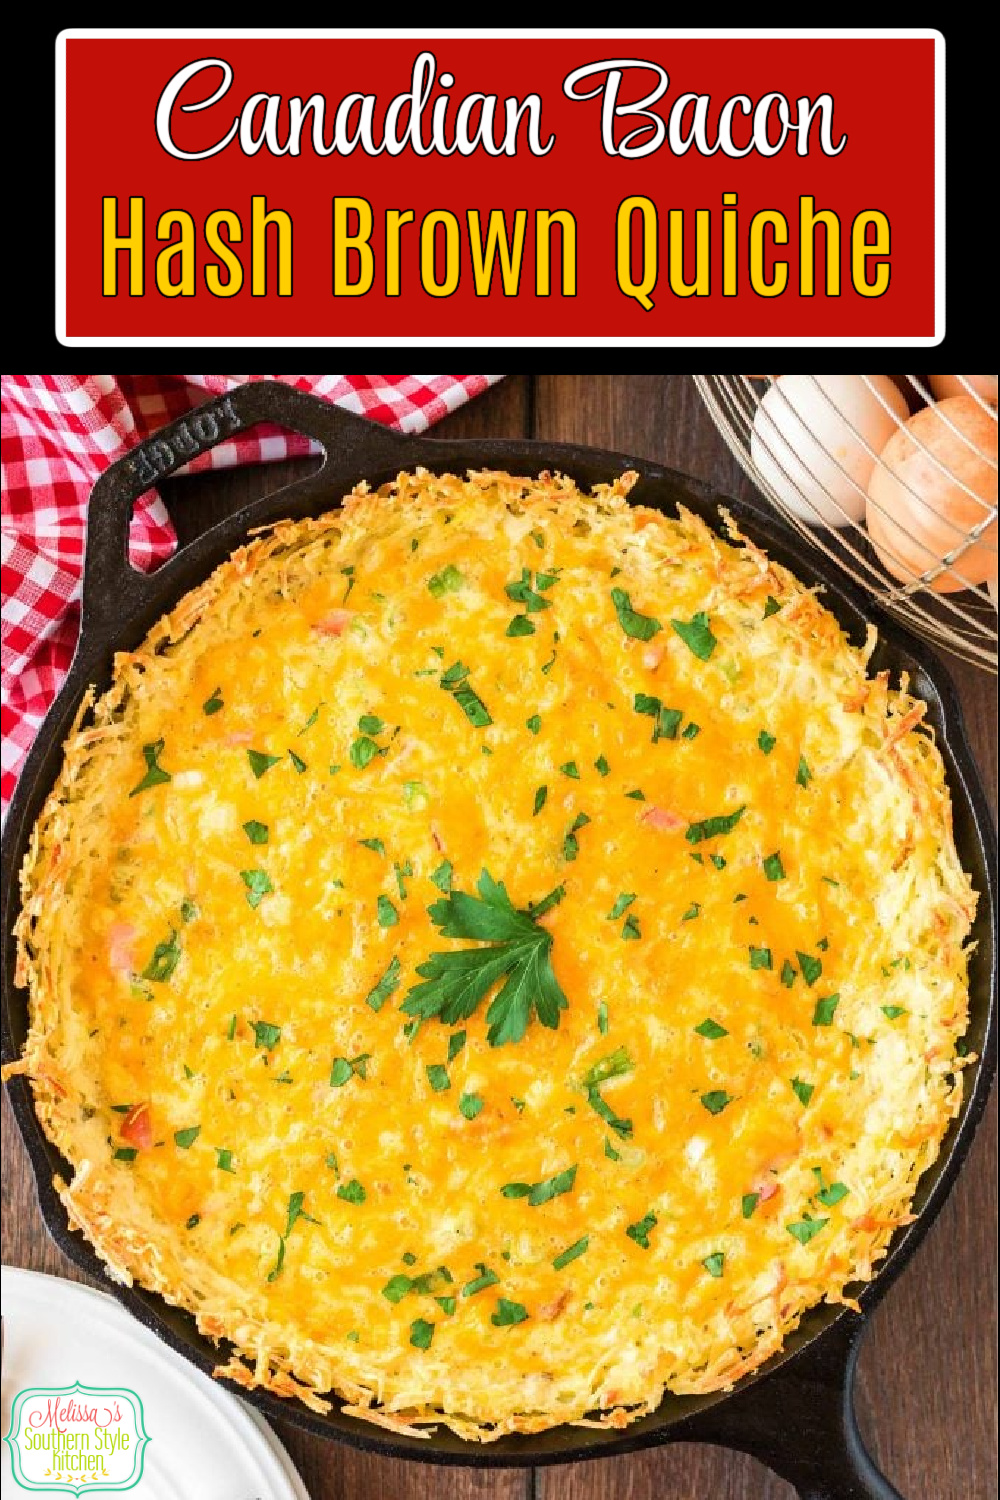 Skip the pastry crust and make this Canadian Bacon Hash Brown Quiche using a crispy shredded hash brown potato crust, instead #quiche #hashbrowns #hashbrownquiche #quicherecipes #bestquicherecipes